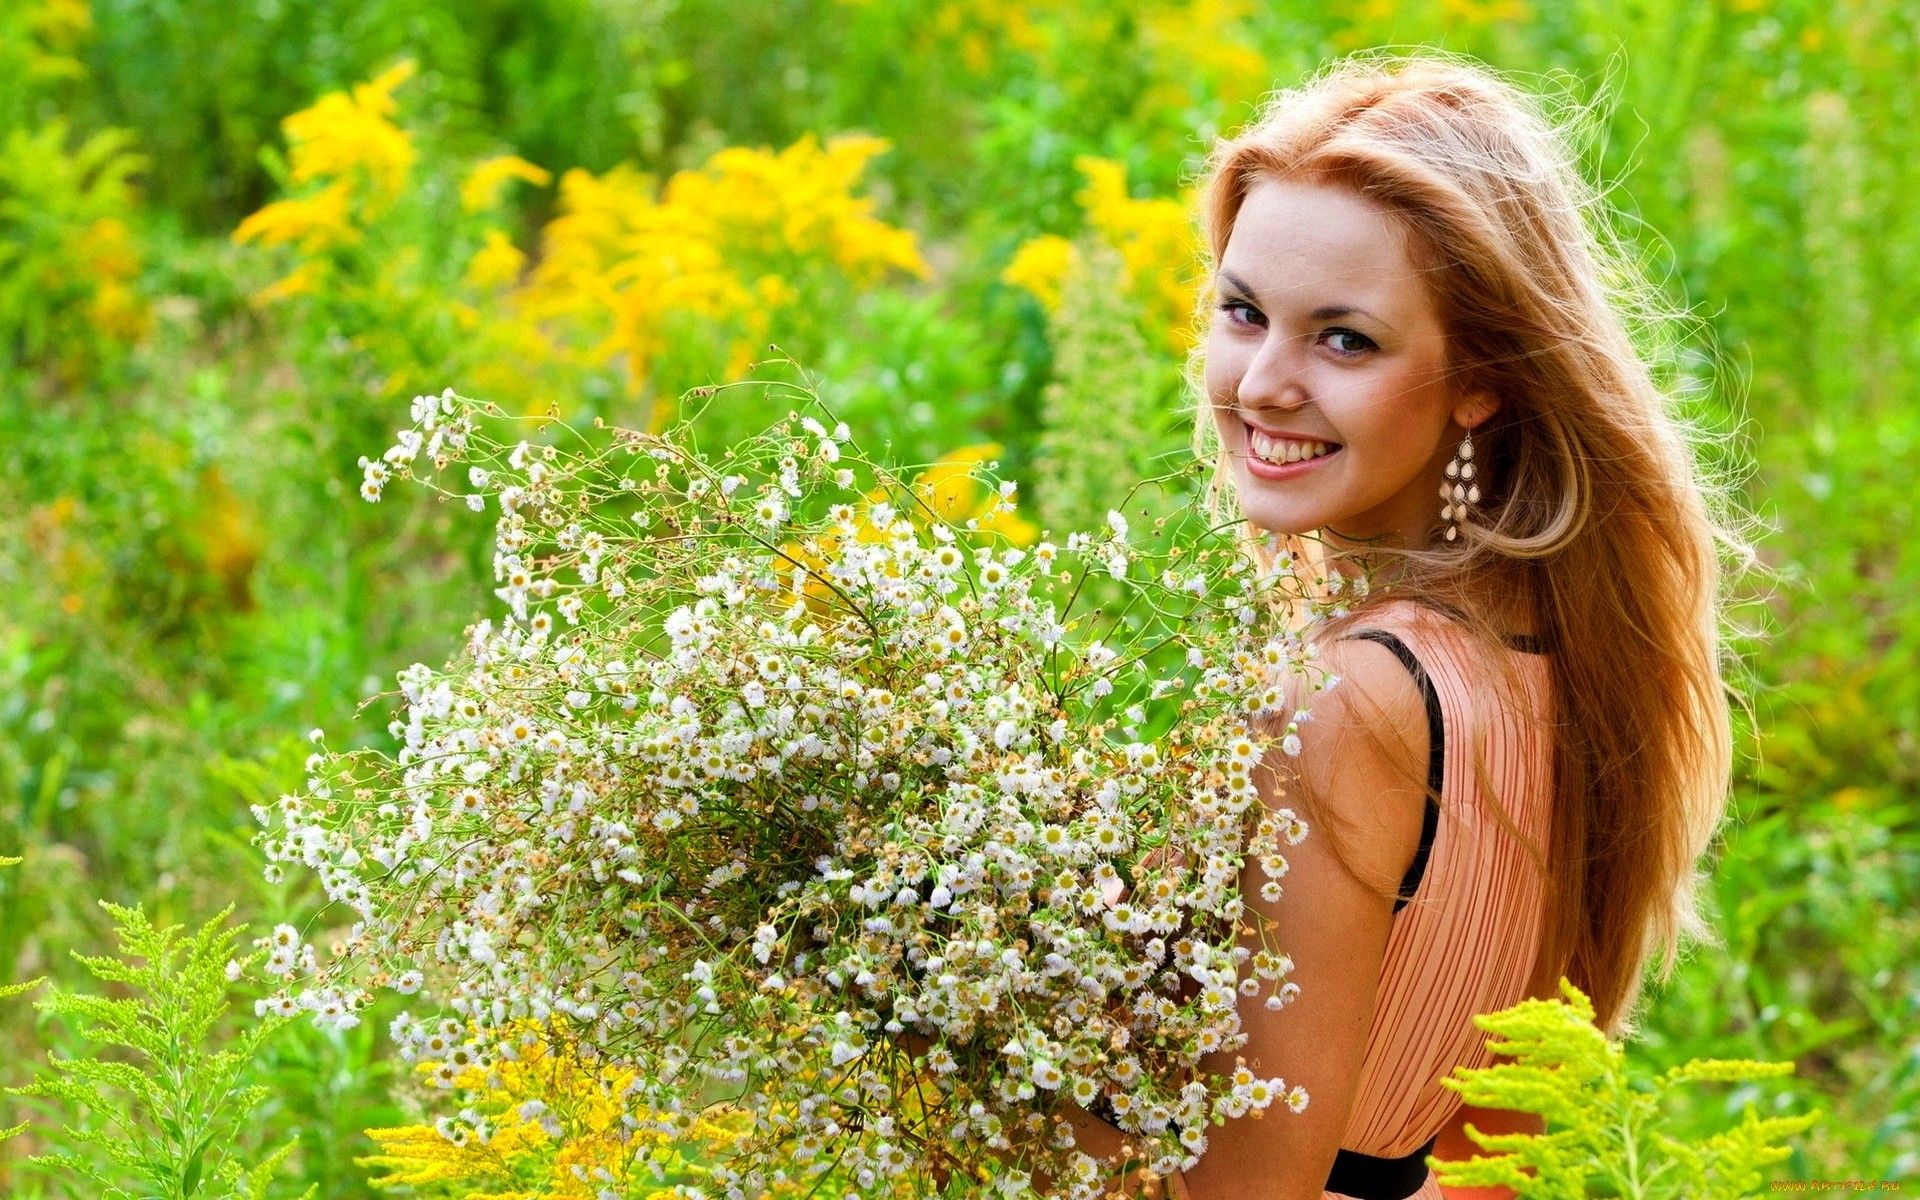 Free photo: Woman with flowers, Flower, Flowers